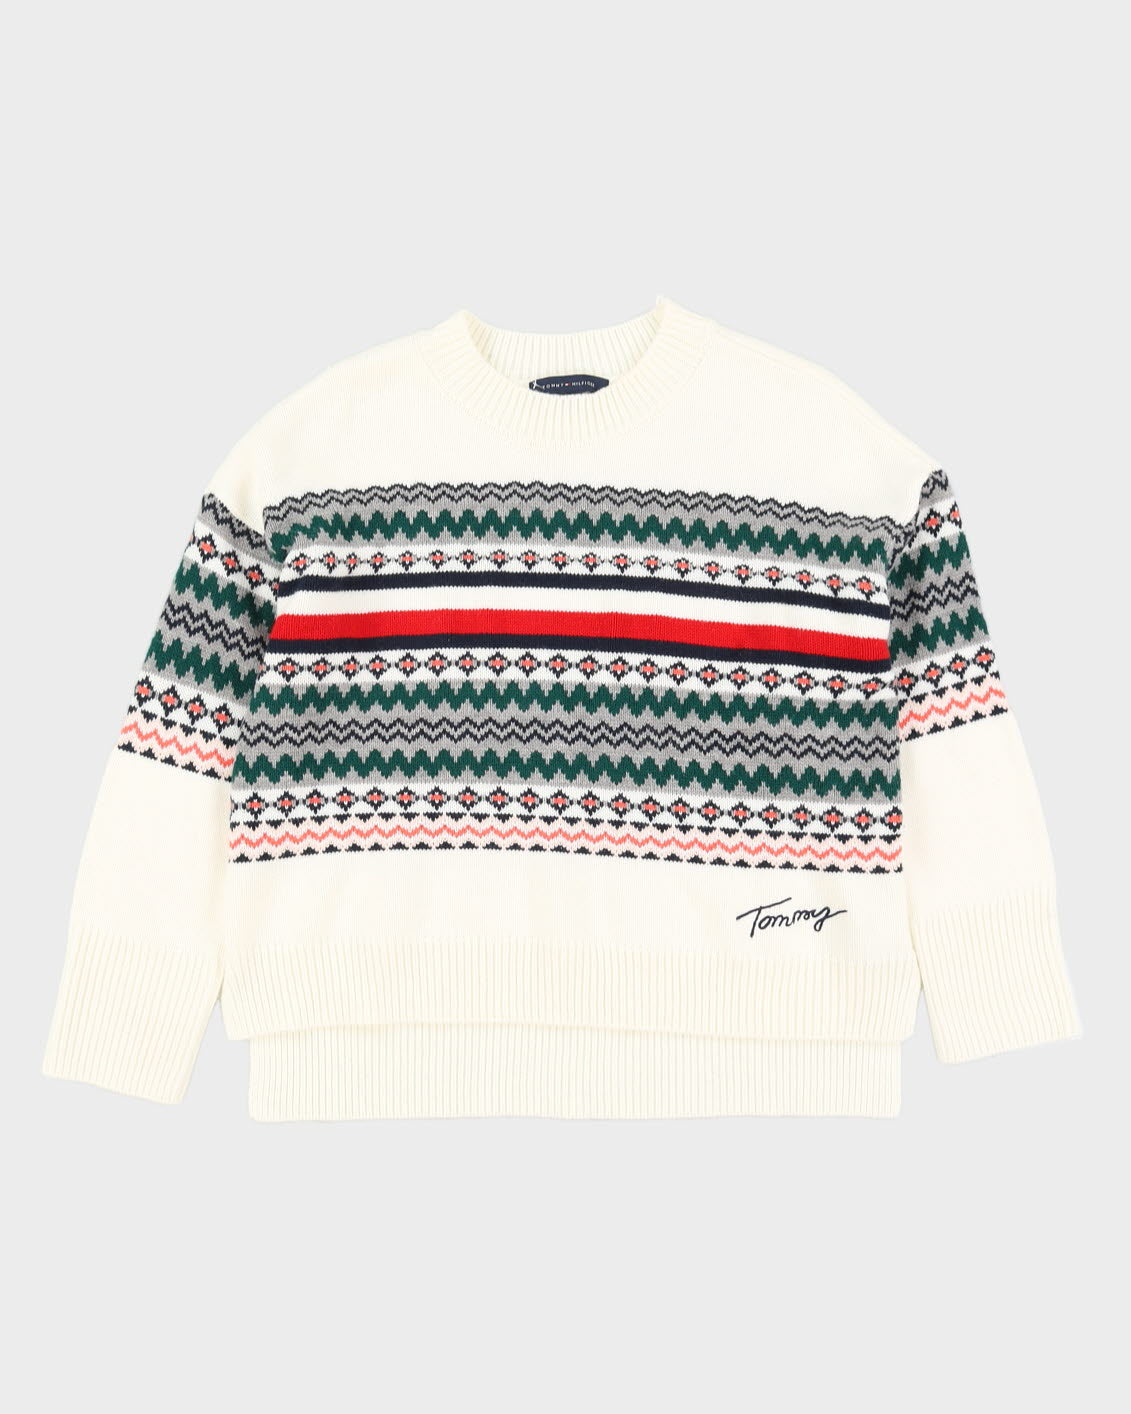 Tommy Hilfiger Oversized White Knitted Jumper - S